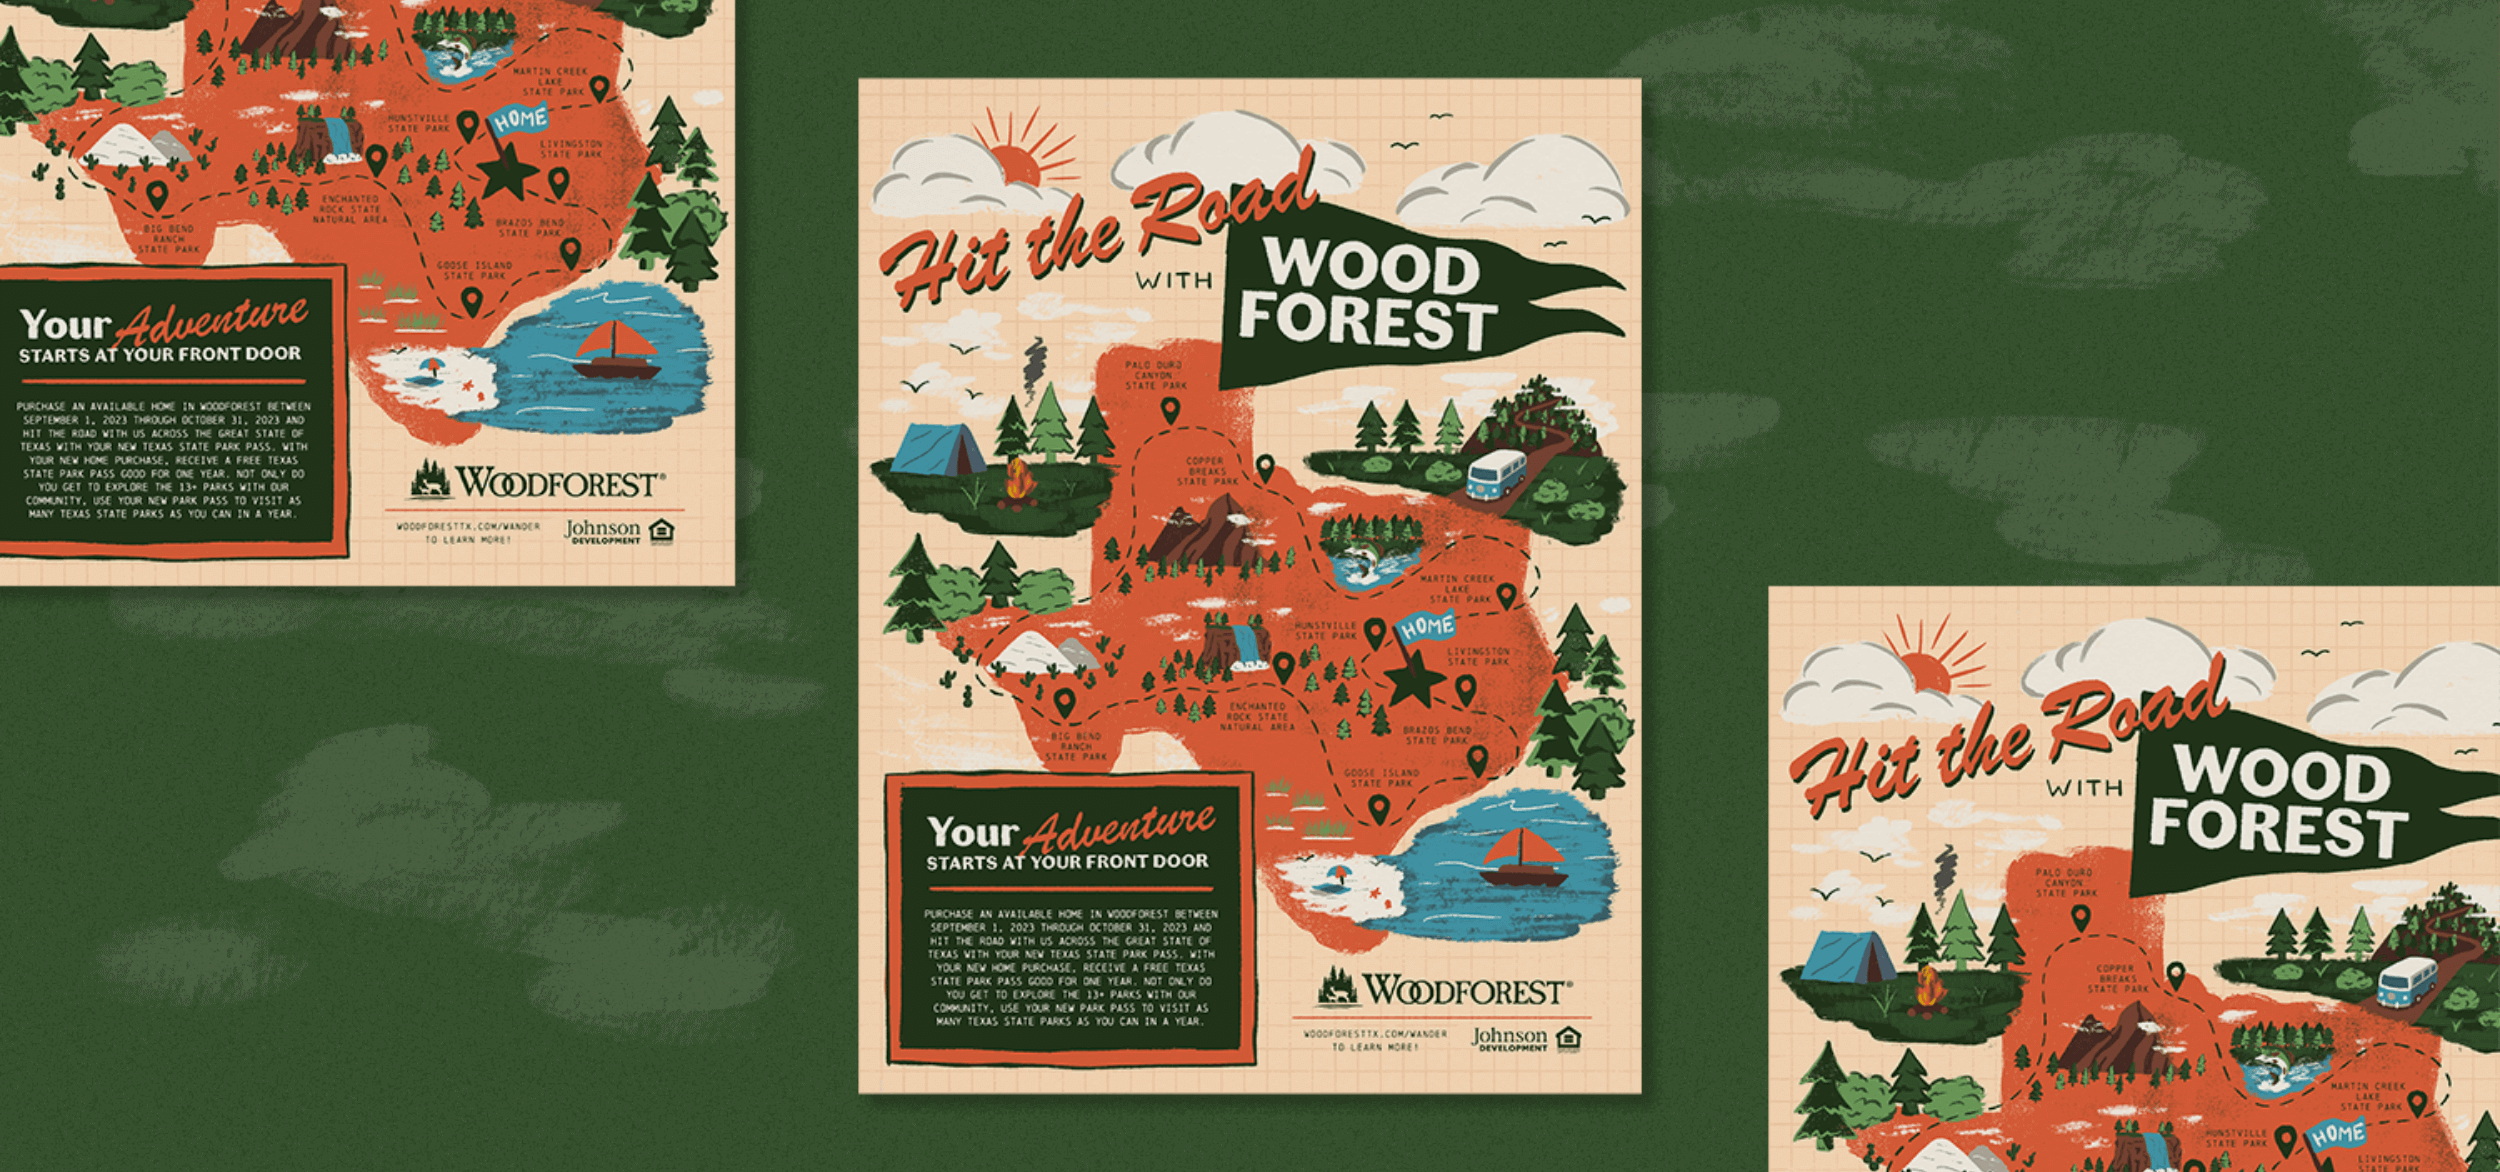 Flyers showing the Hit the Road key art created by ST8MNT for a Woodforest Fall campaign